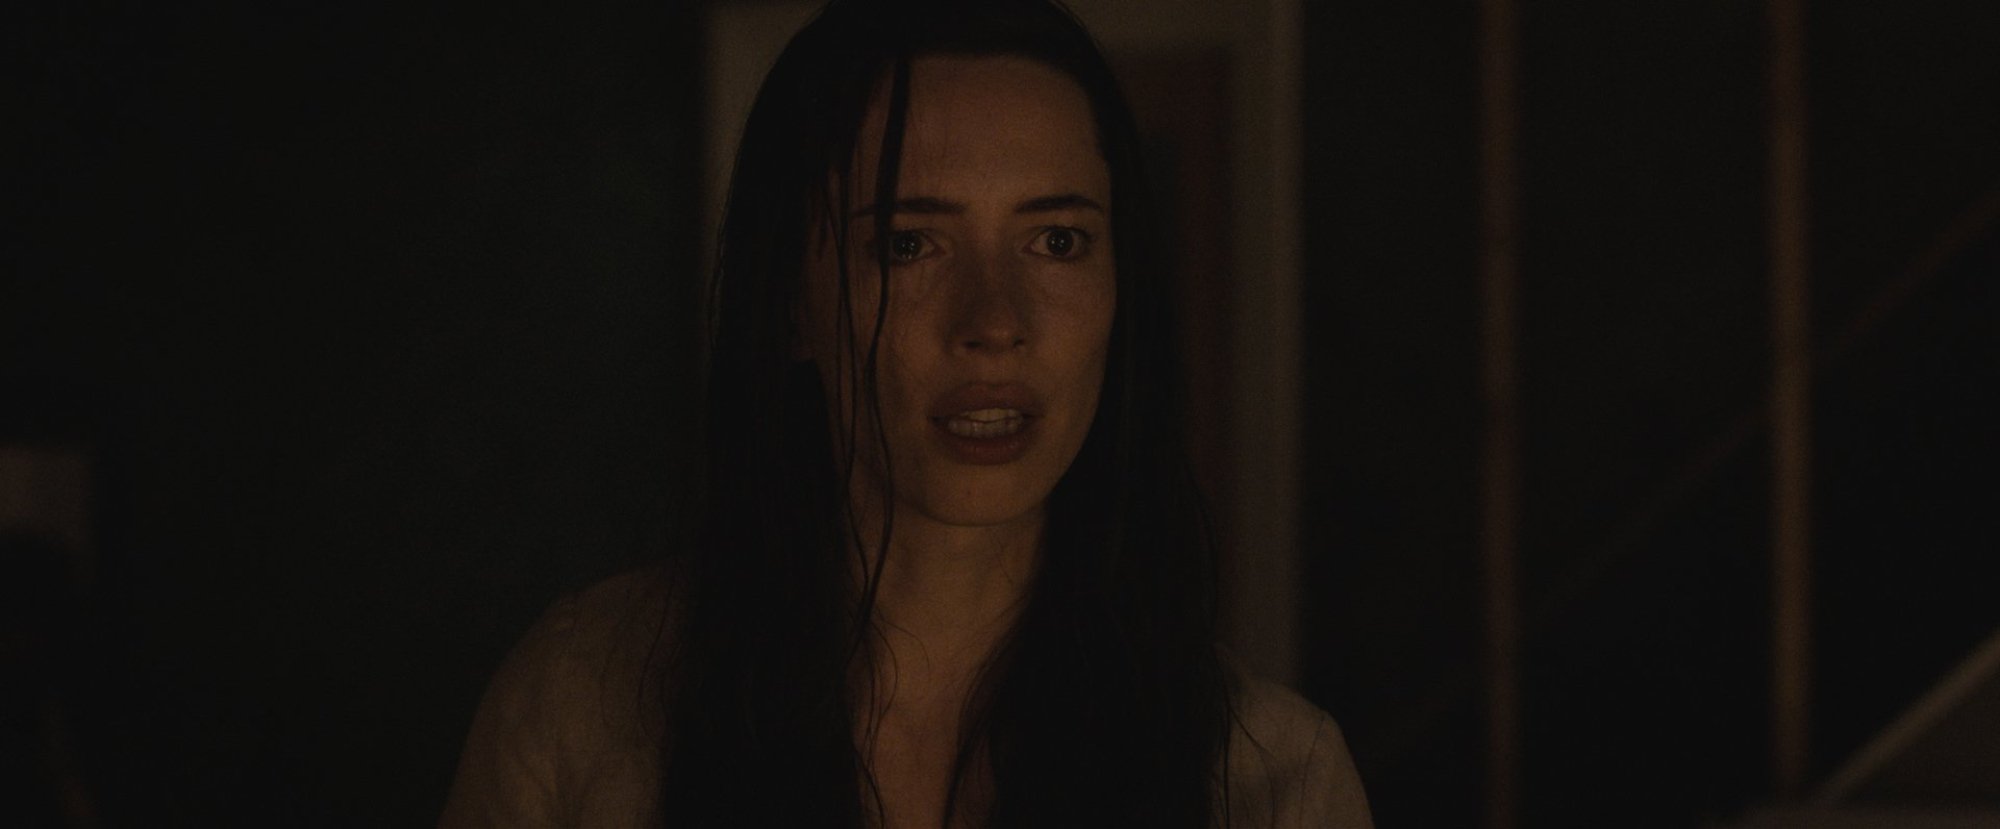 'The Night House' Rebecca Hall as Beth looking frightened with tears in her eyes